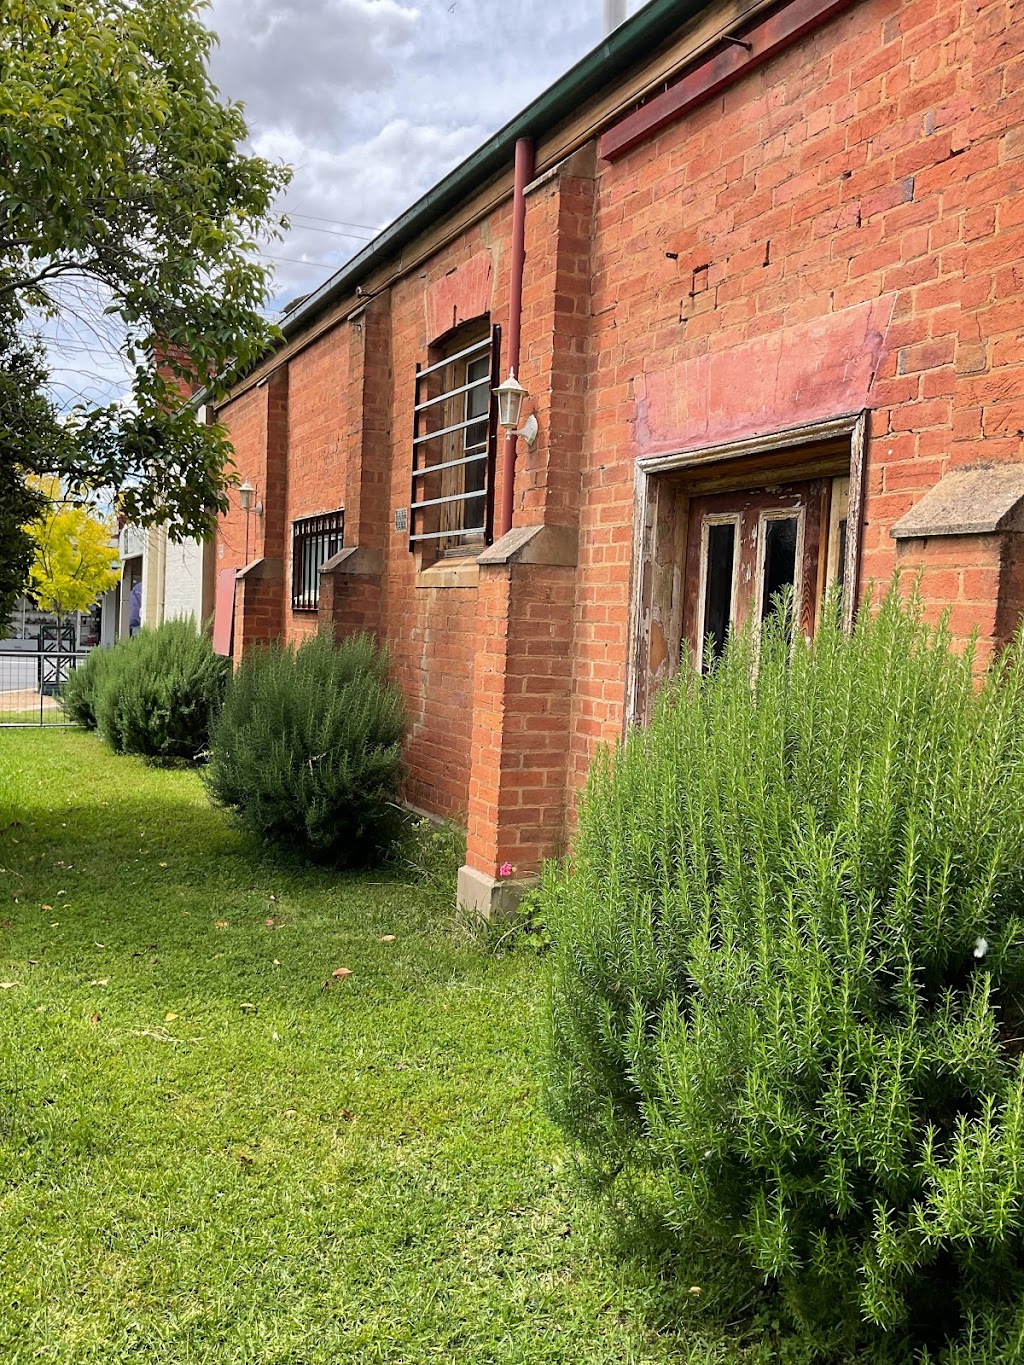 Rosemary Walkway of Hilson’s Hall | park | 41 Deniliquin St, Tocumwal NSW 2714, Australia | 0460877597 OR +61 460 877 597